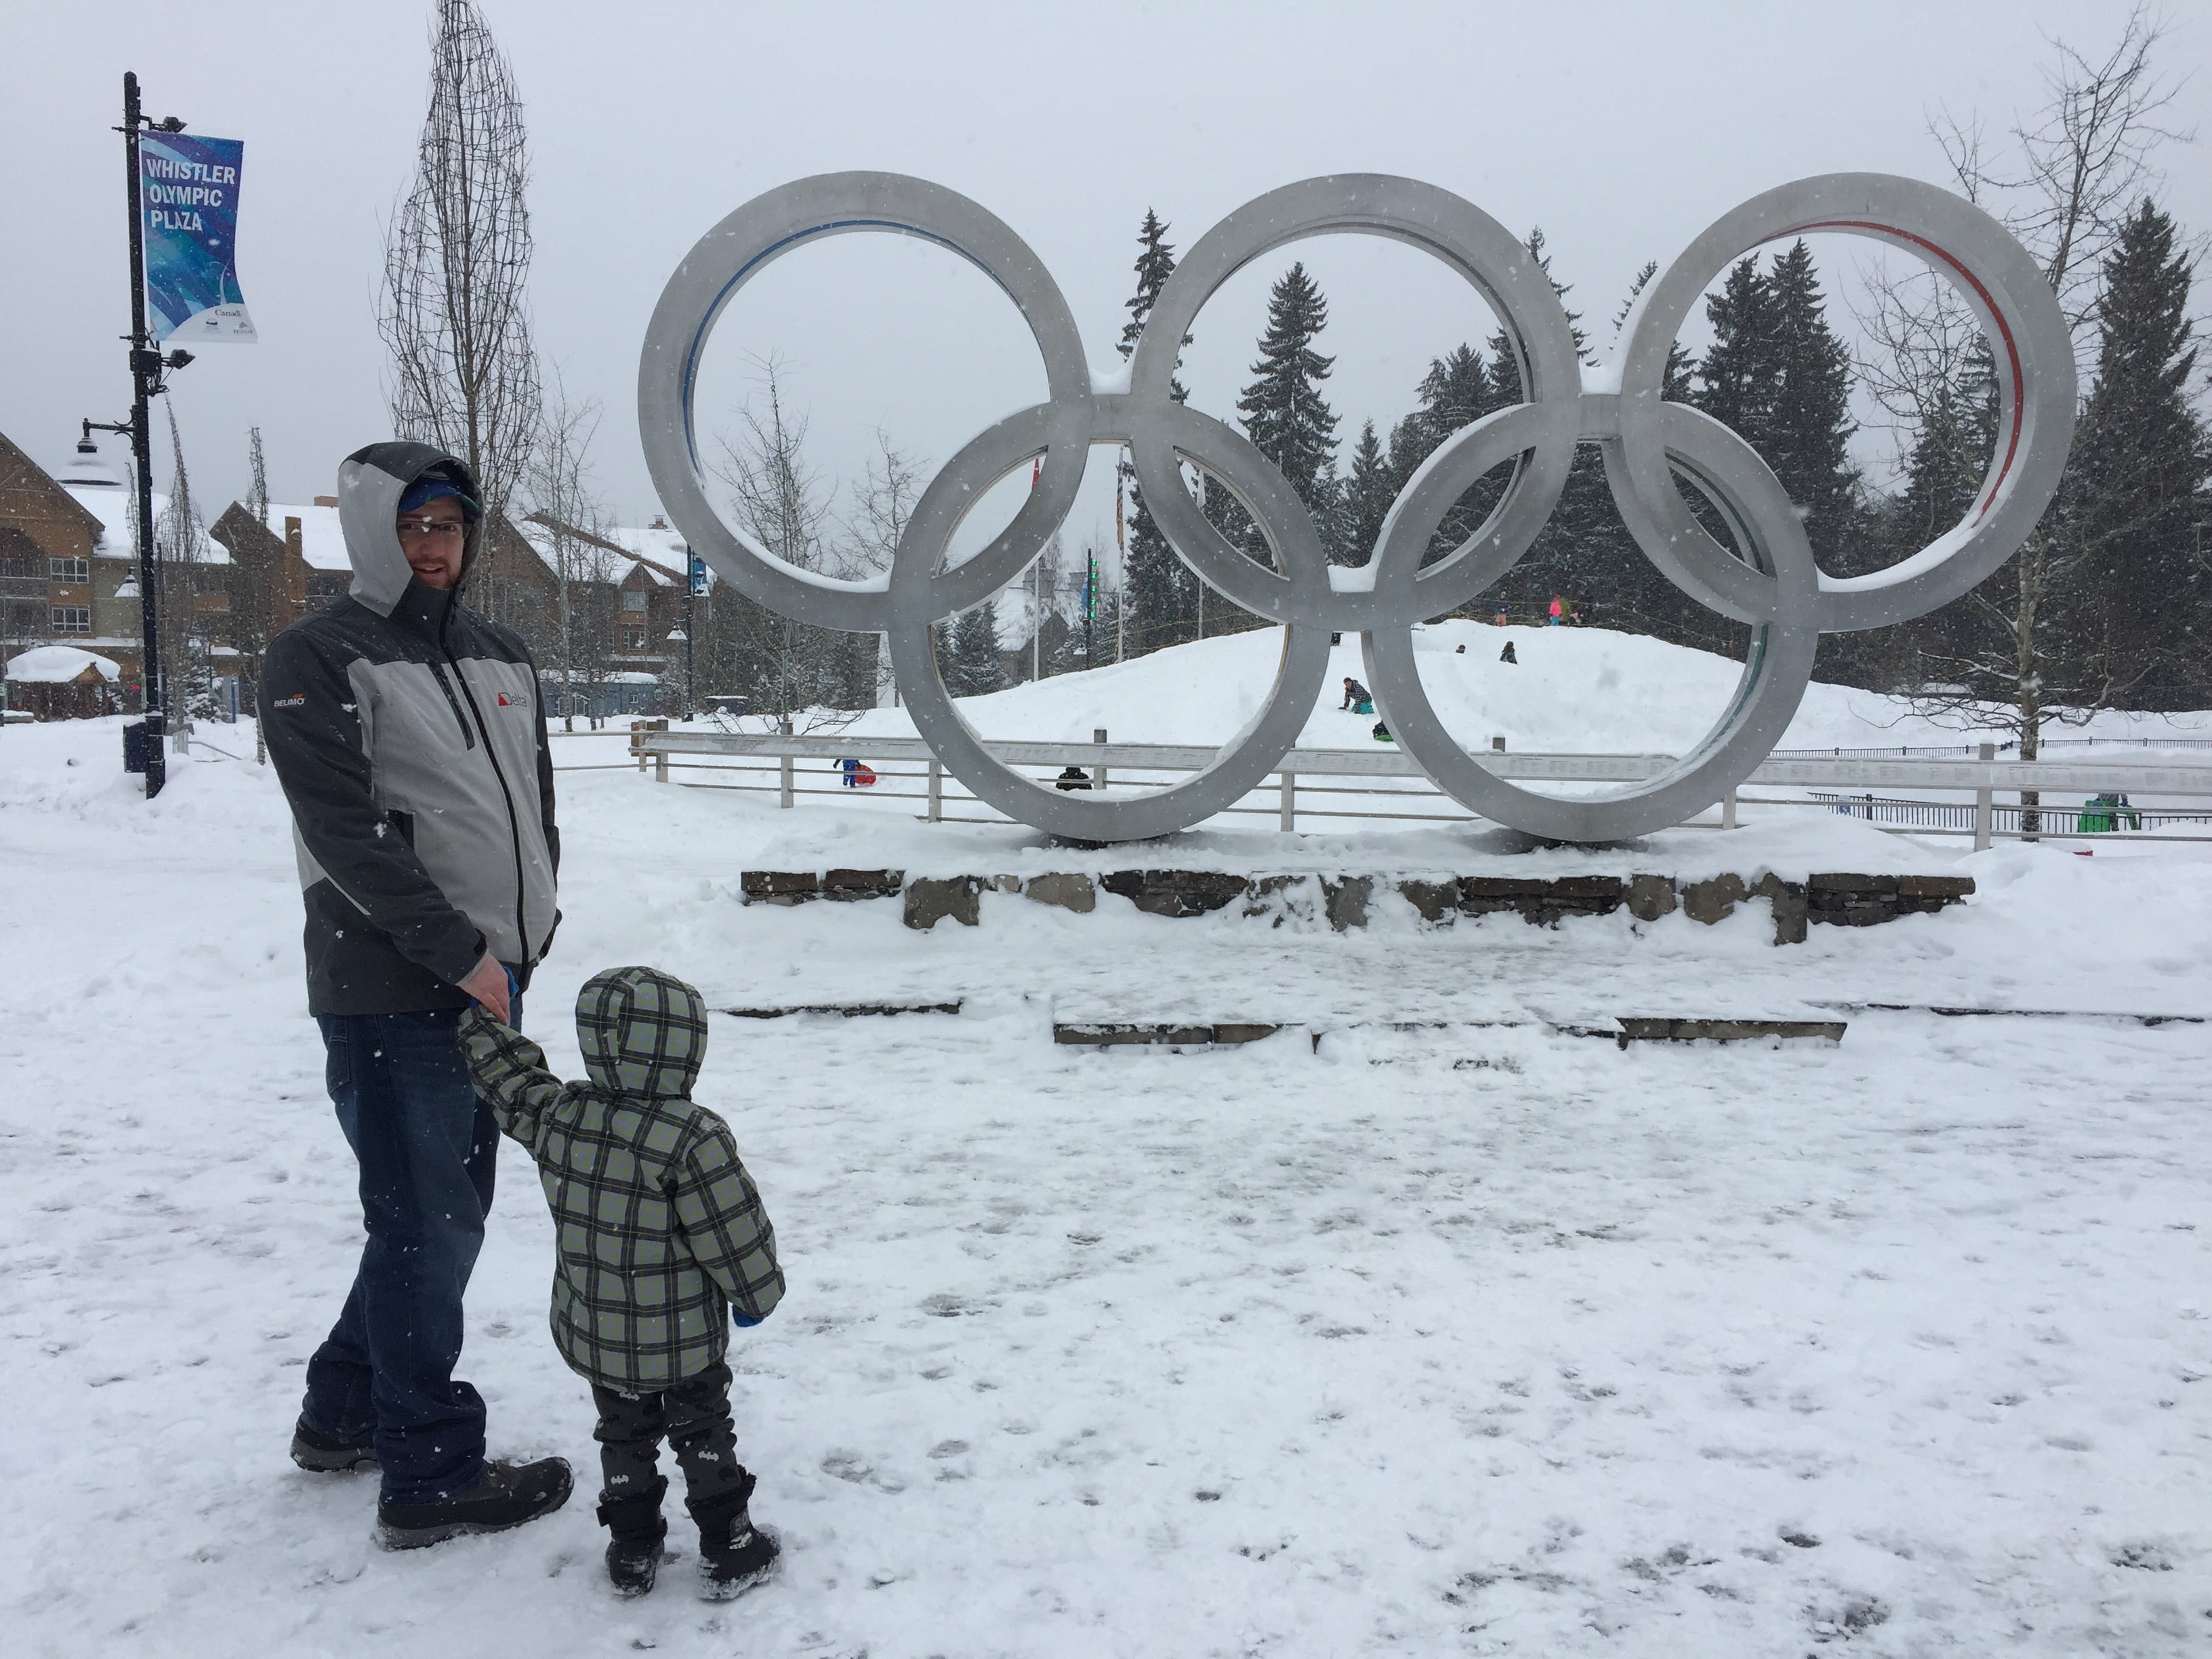 Man and Son in Snow in front of Olympic Rings in Whistler Village